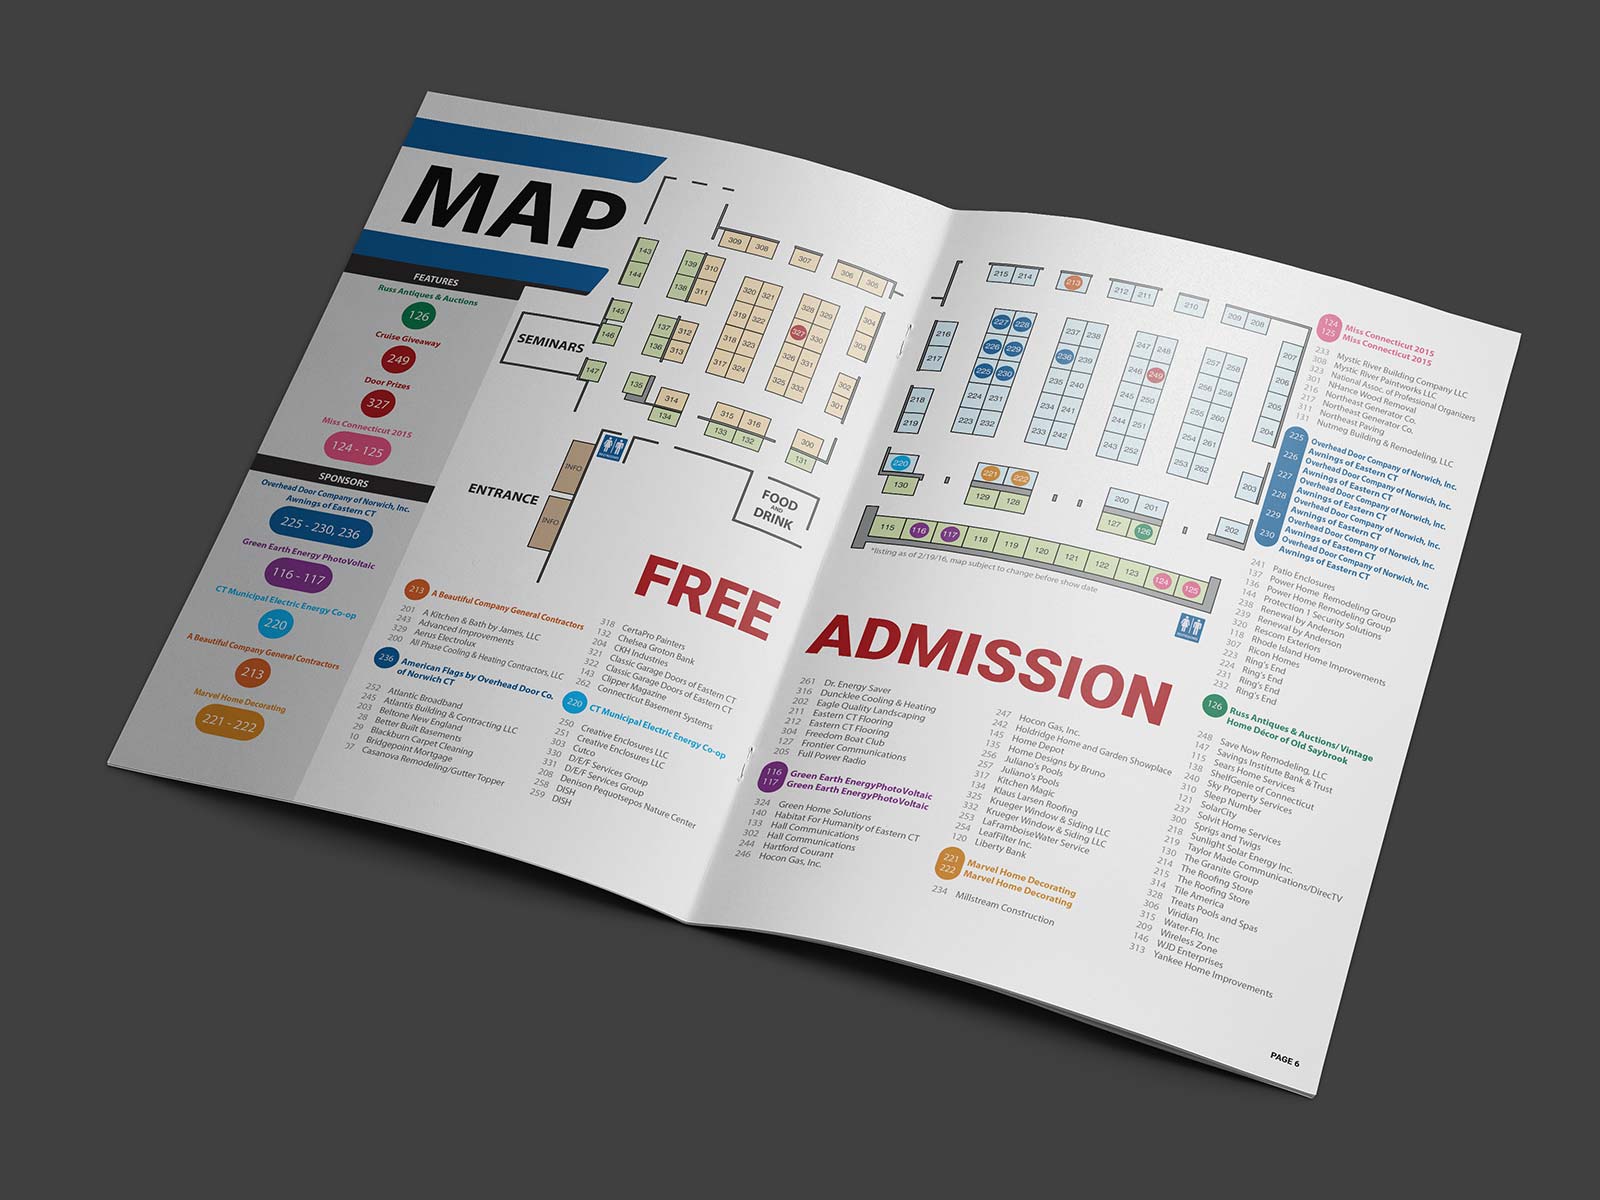 Home Show Program inside pages map